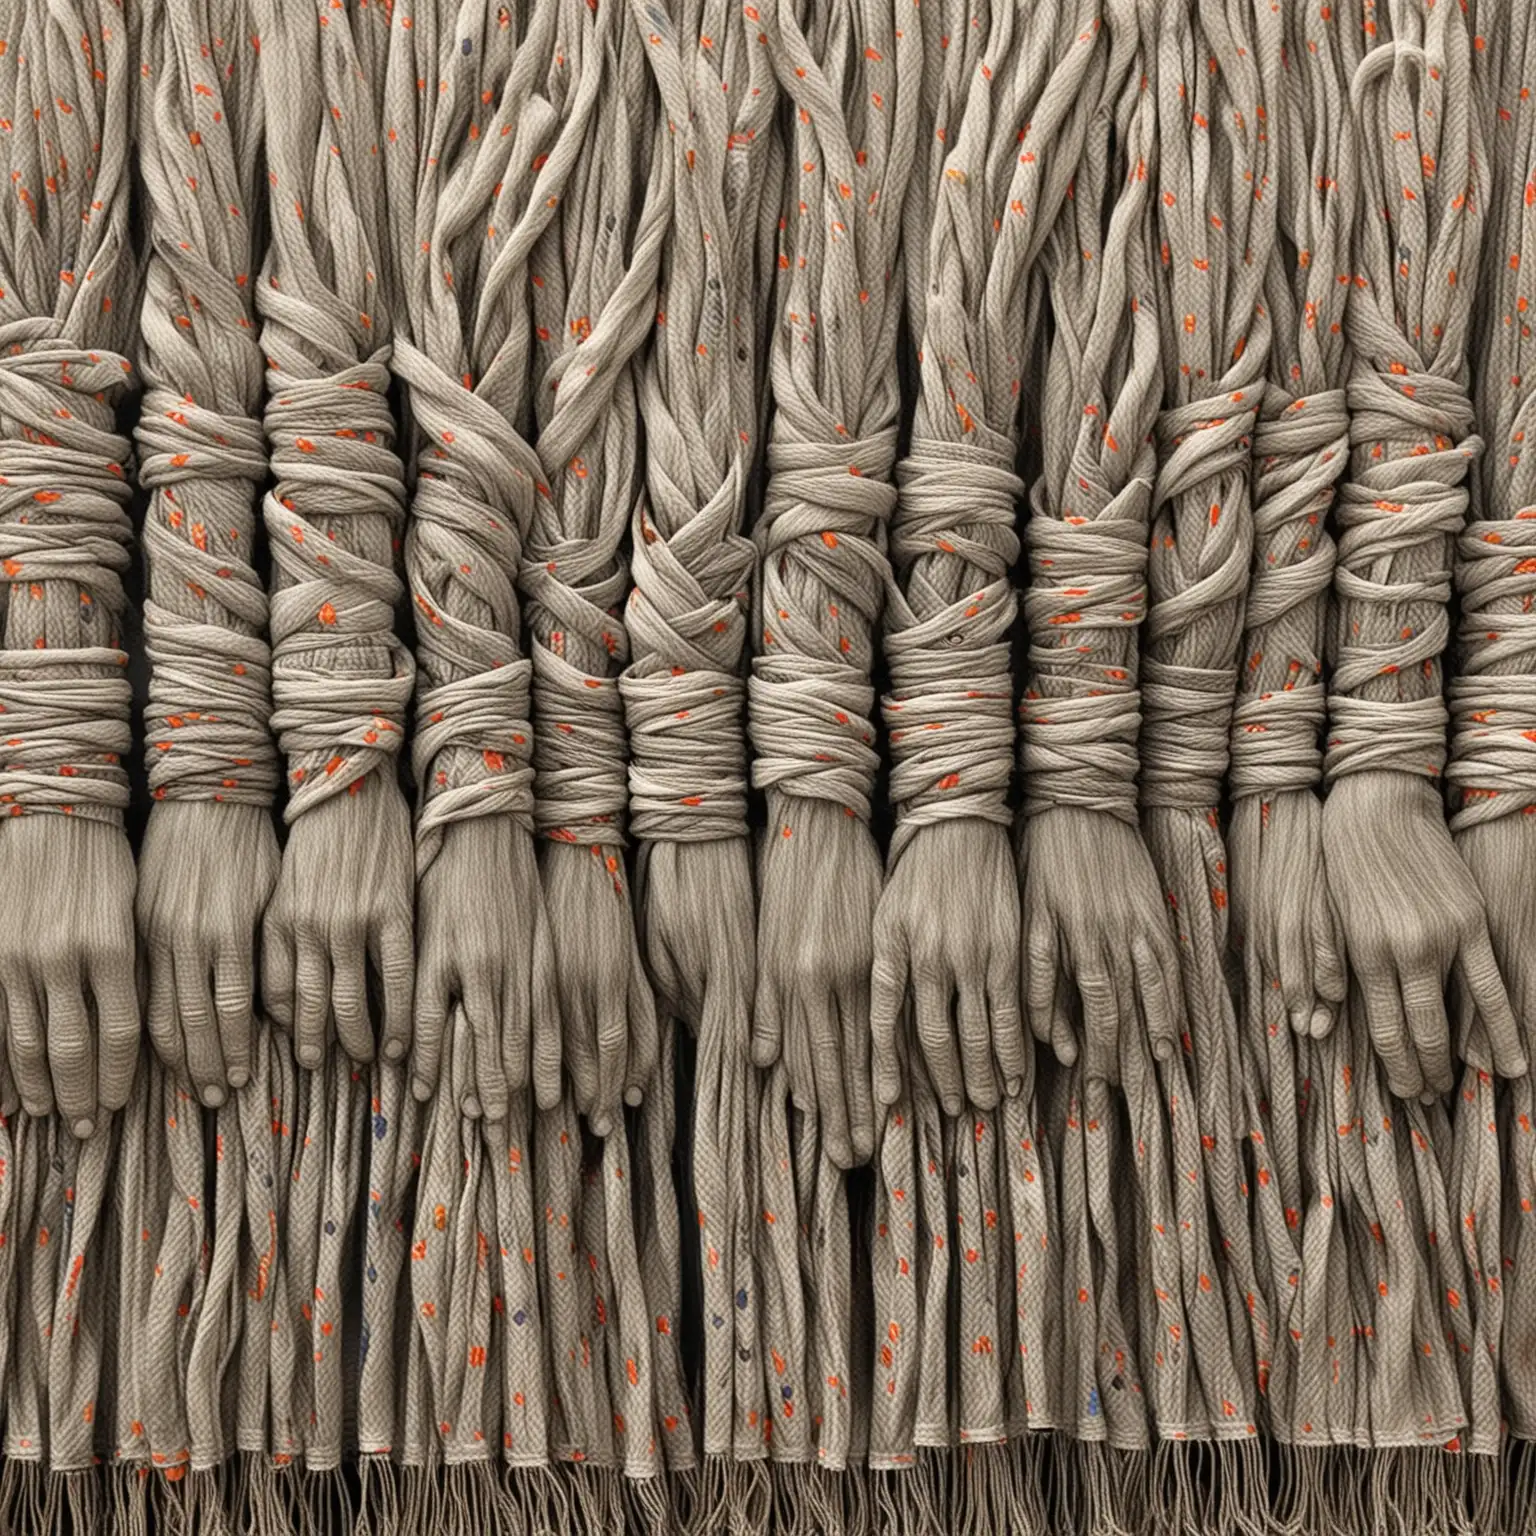 Social Justice textile art with hands bound in fabric representing those who work in clothing sweatshops in America. 